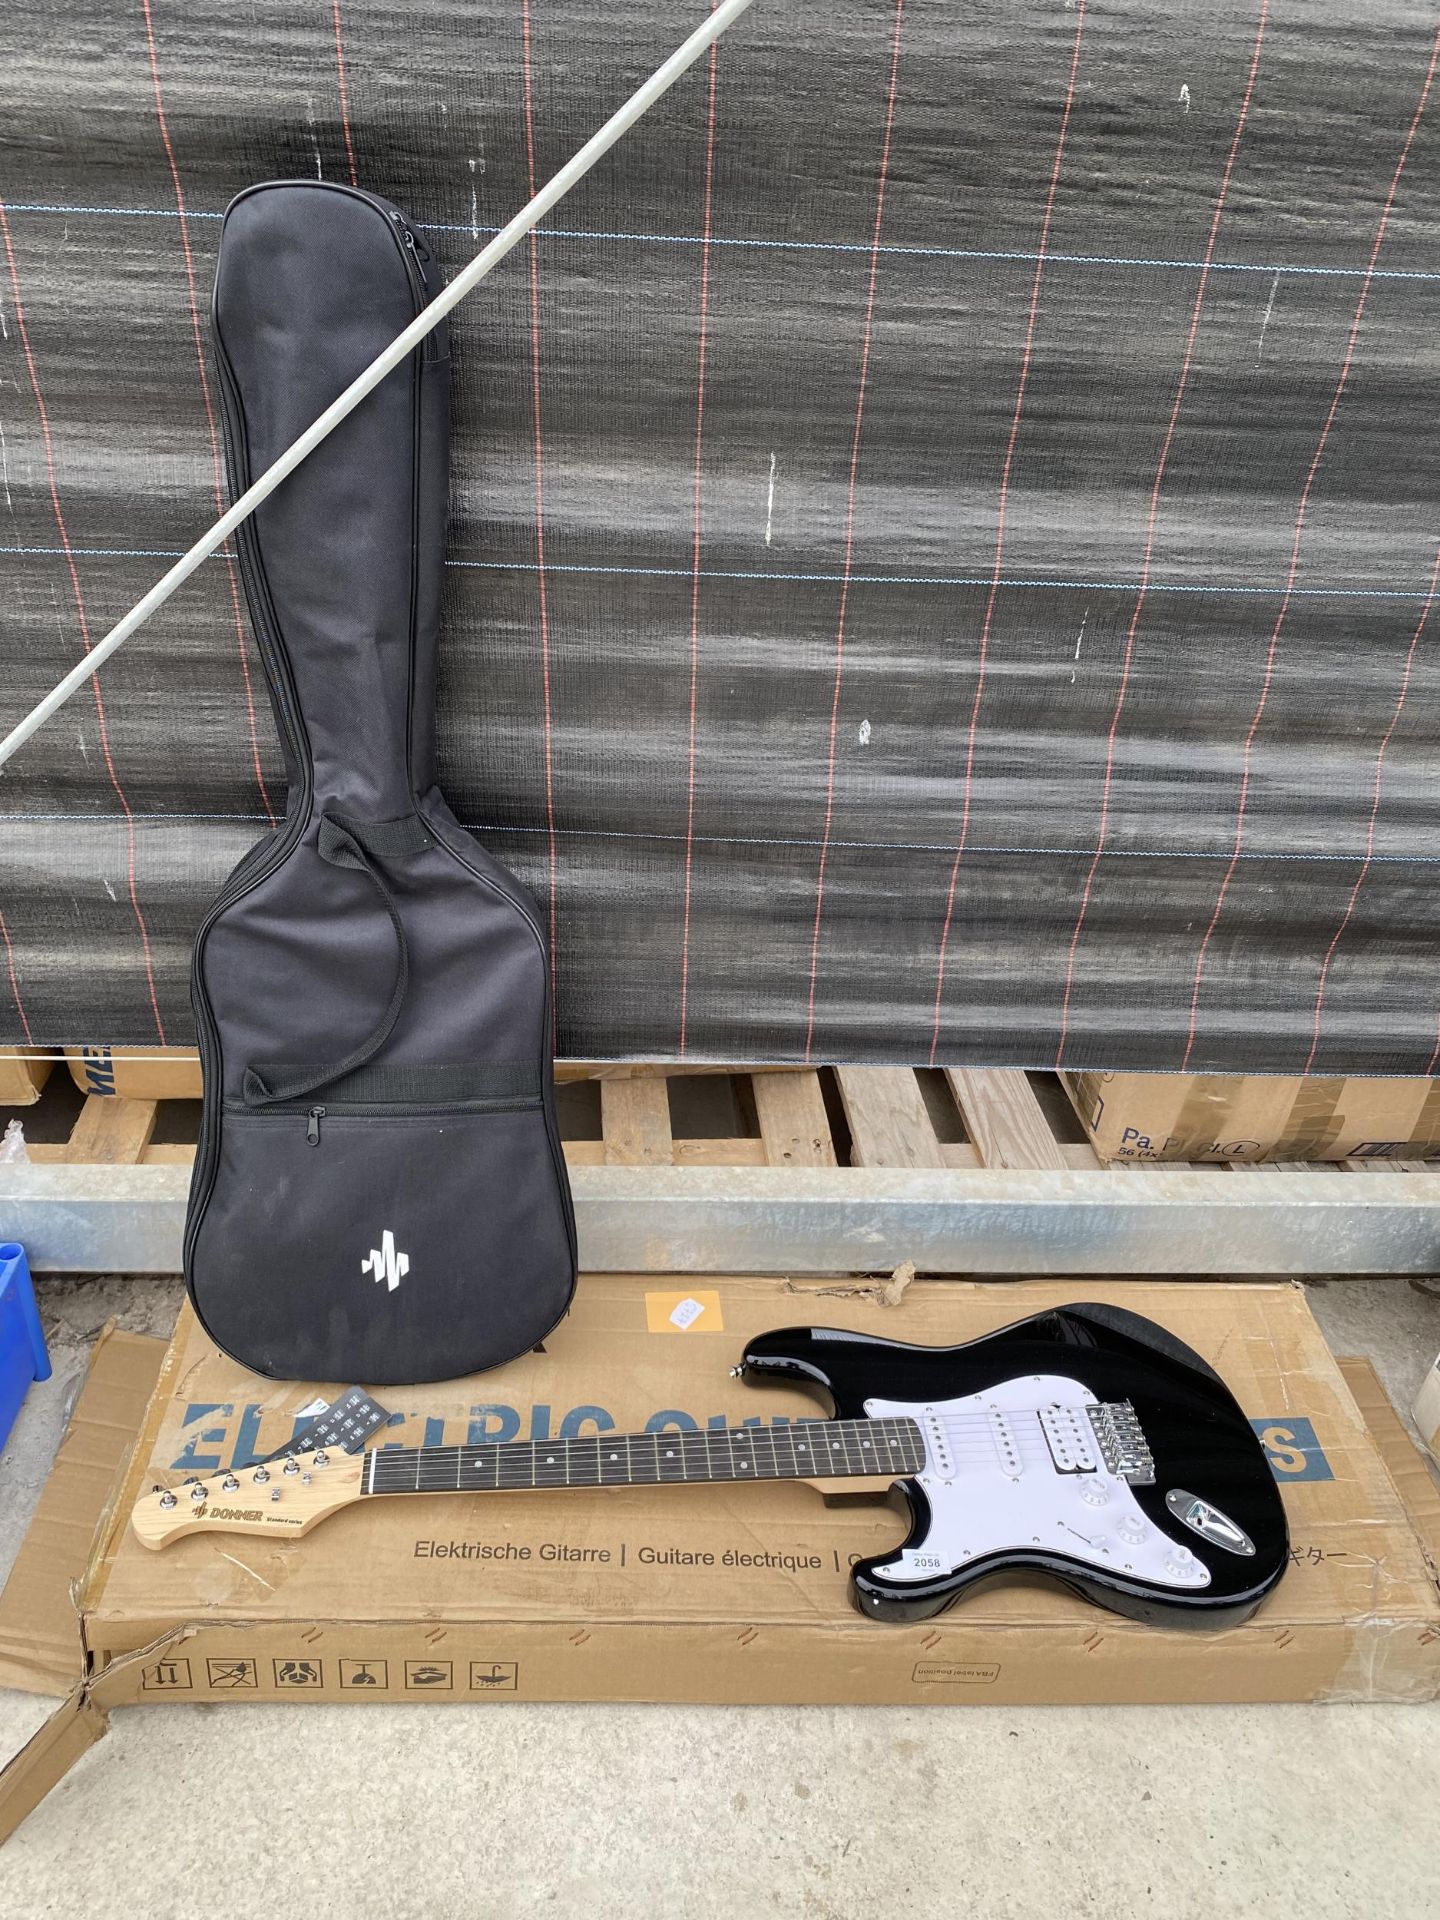 A DONNER ELECTRIC GUITAR AND CARRY CASE